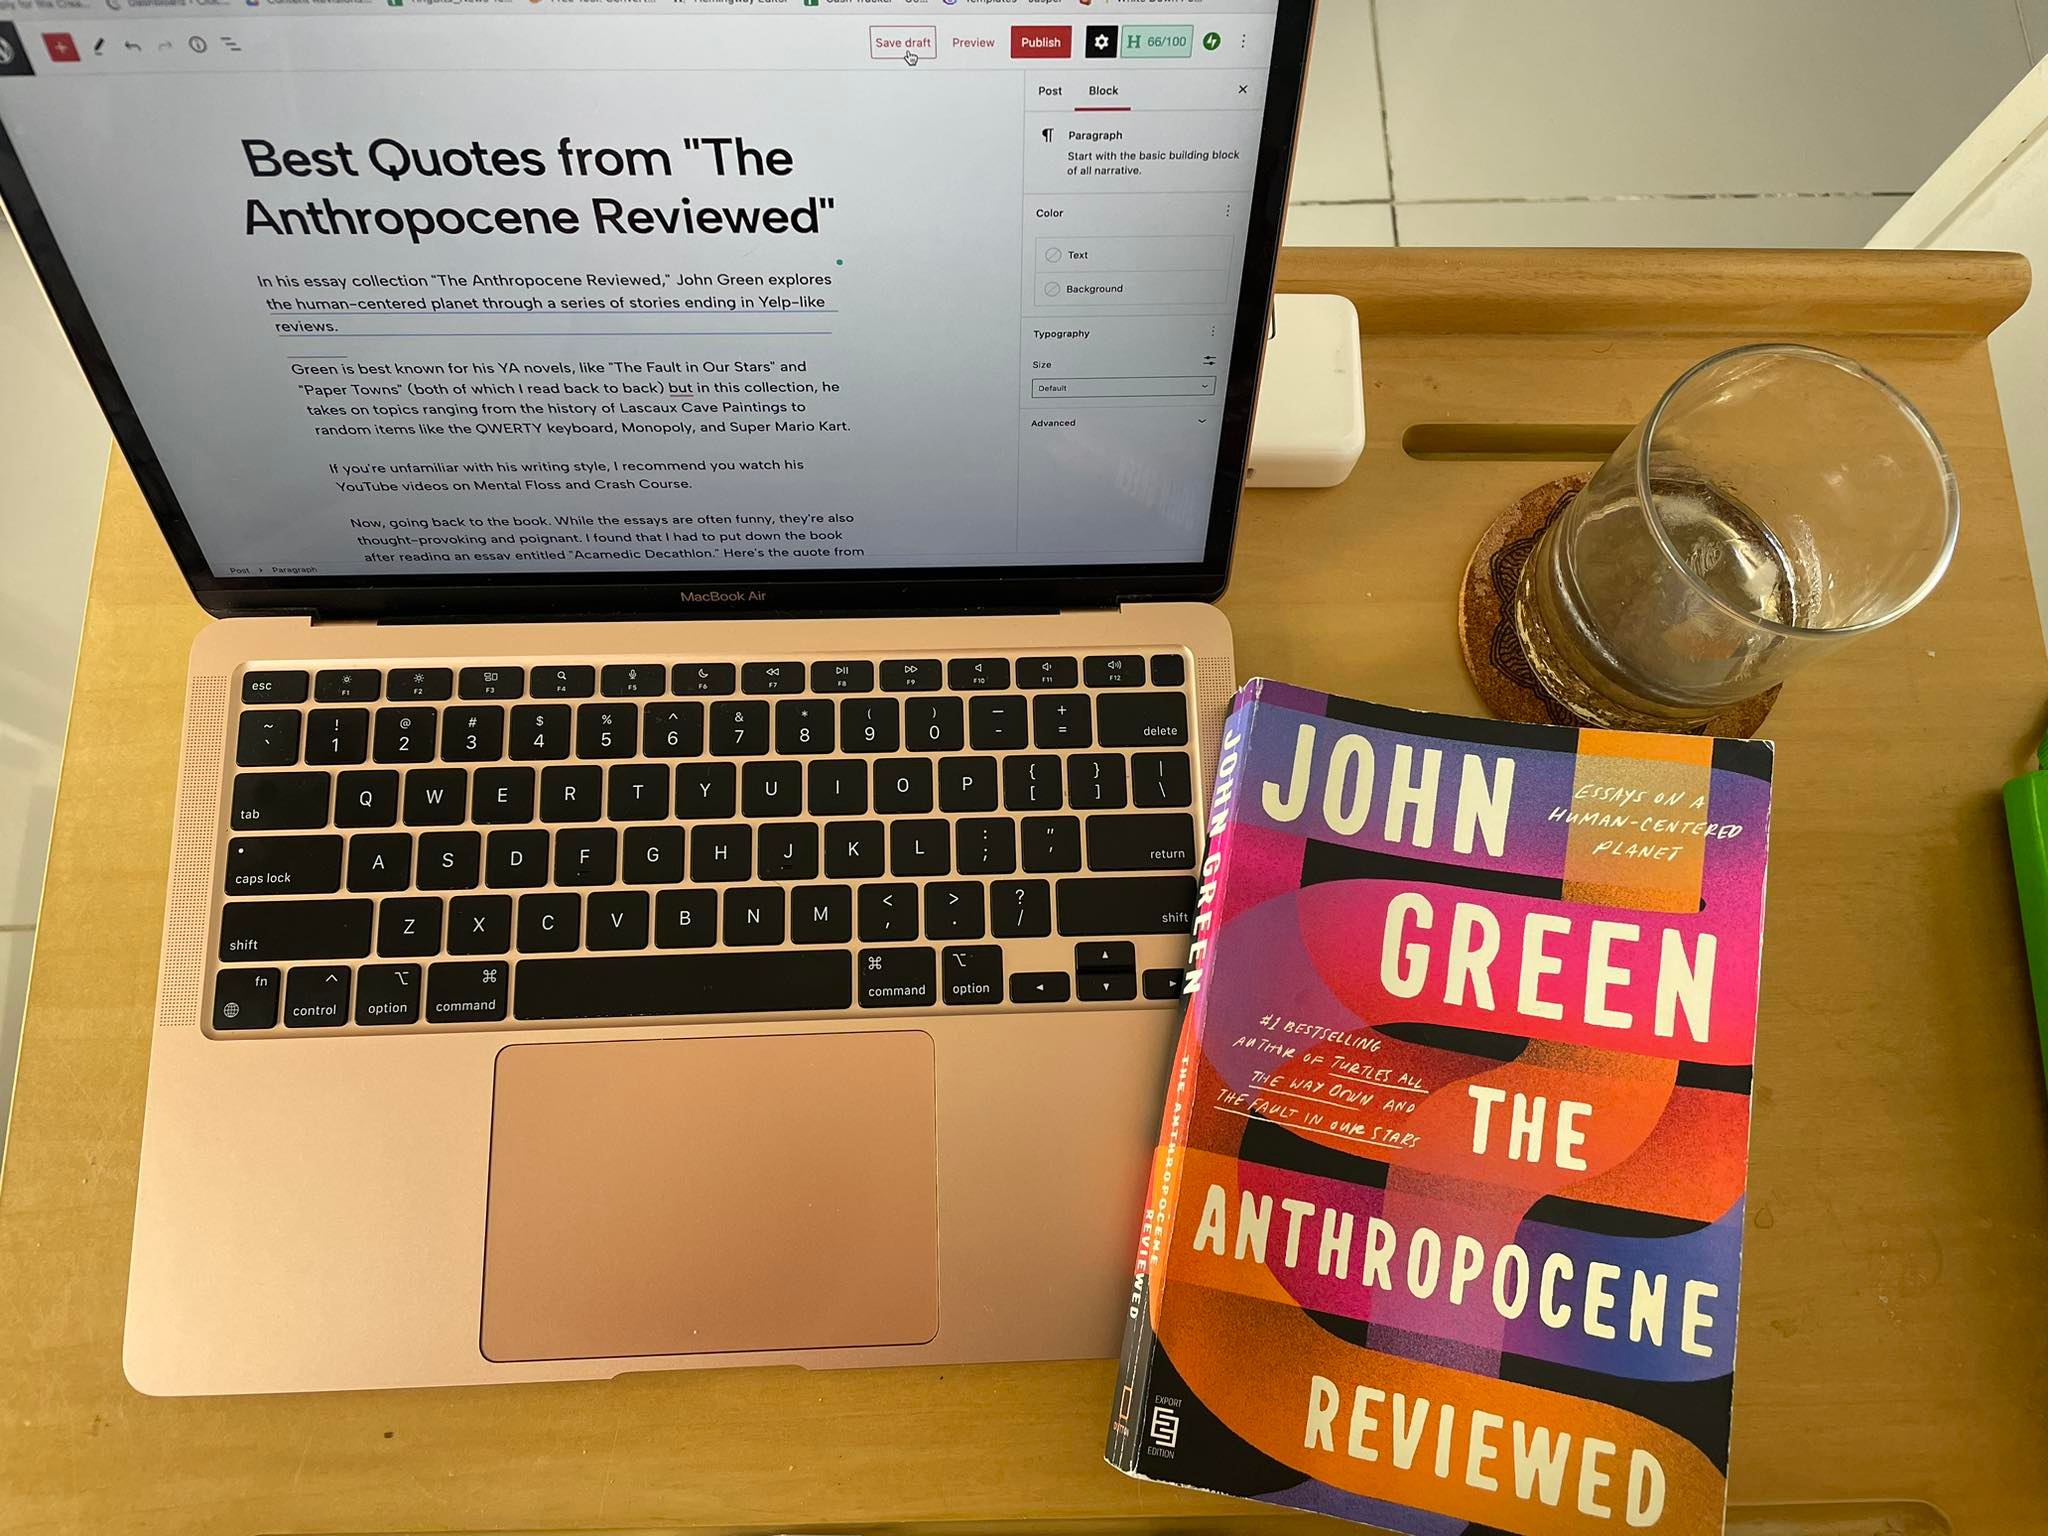 Best Quotes from “The Anthropocene Reviewed” by John Green